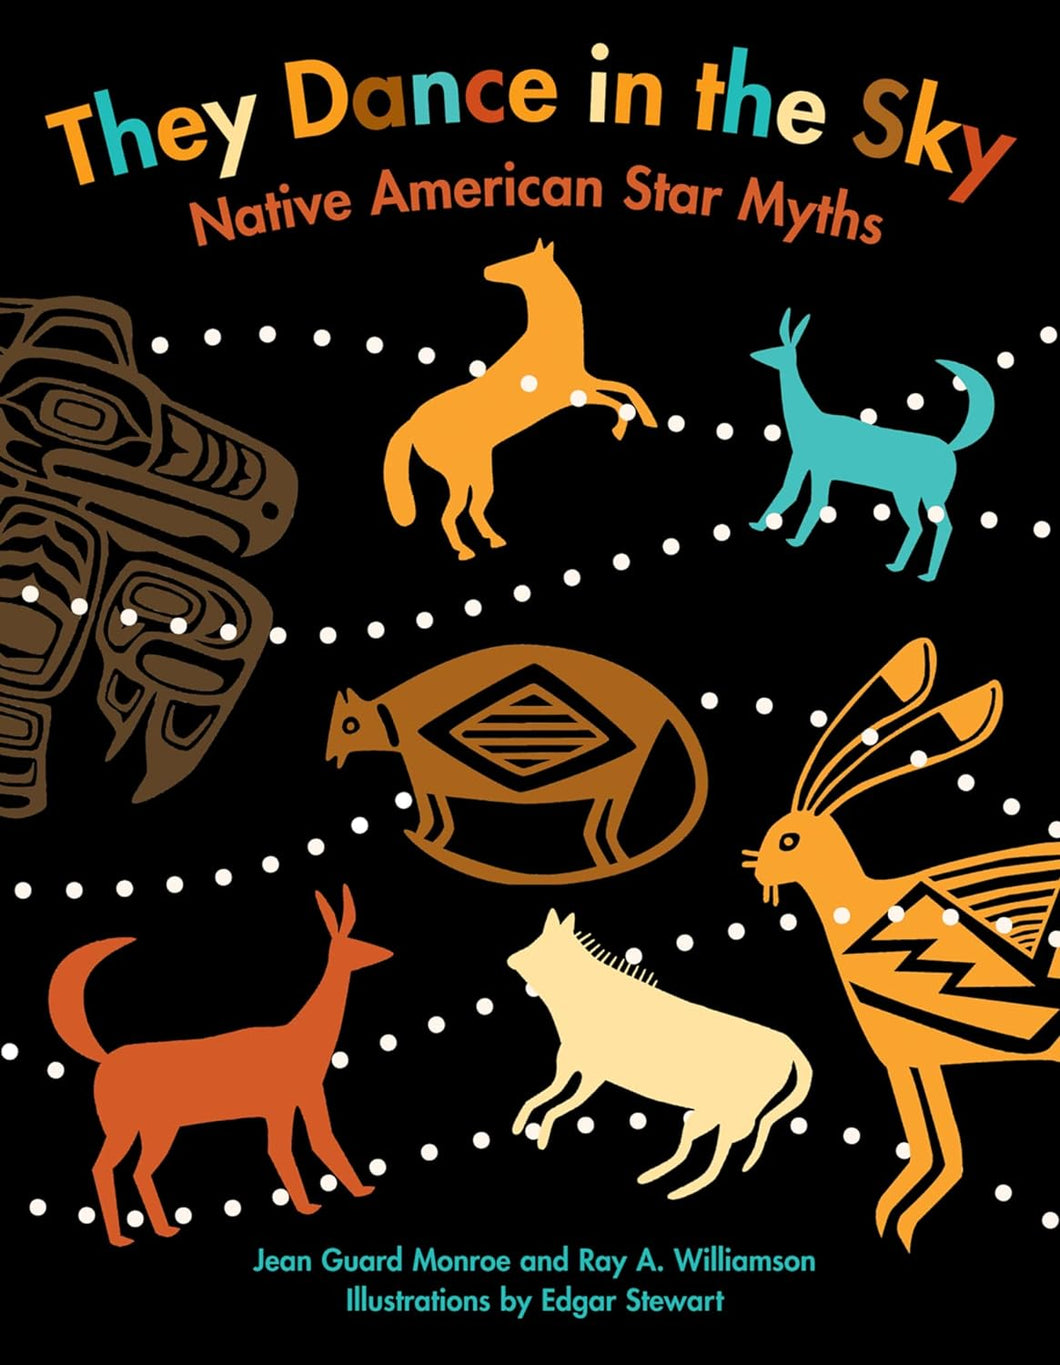 They Dance in the Sky - Native American Star Myths